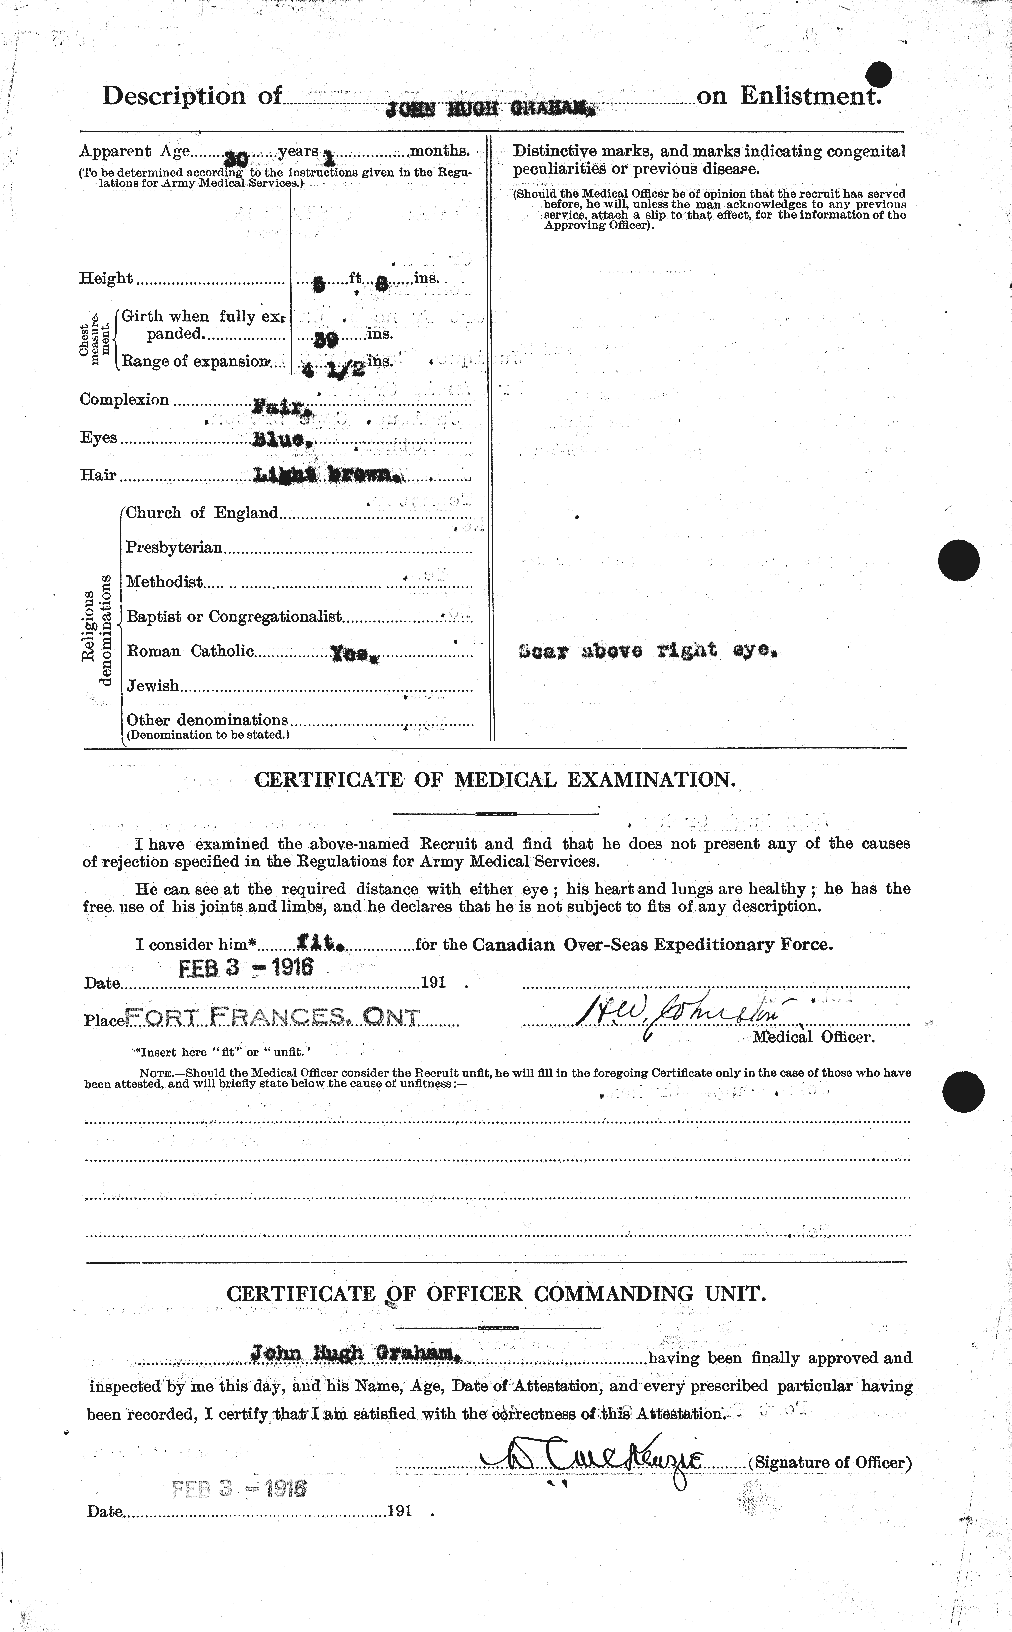 Personnel Records of the First World War - CEF 359184b